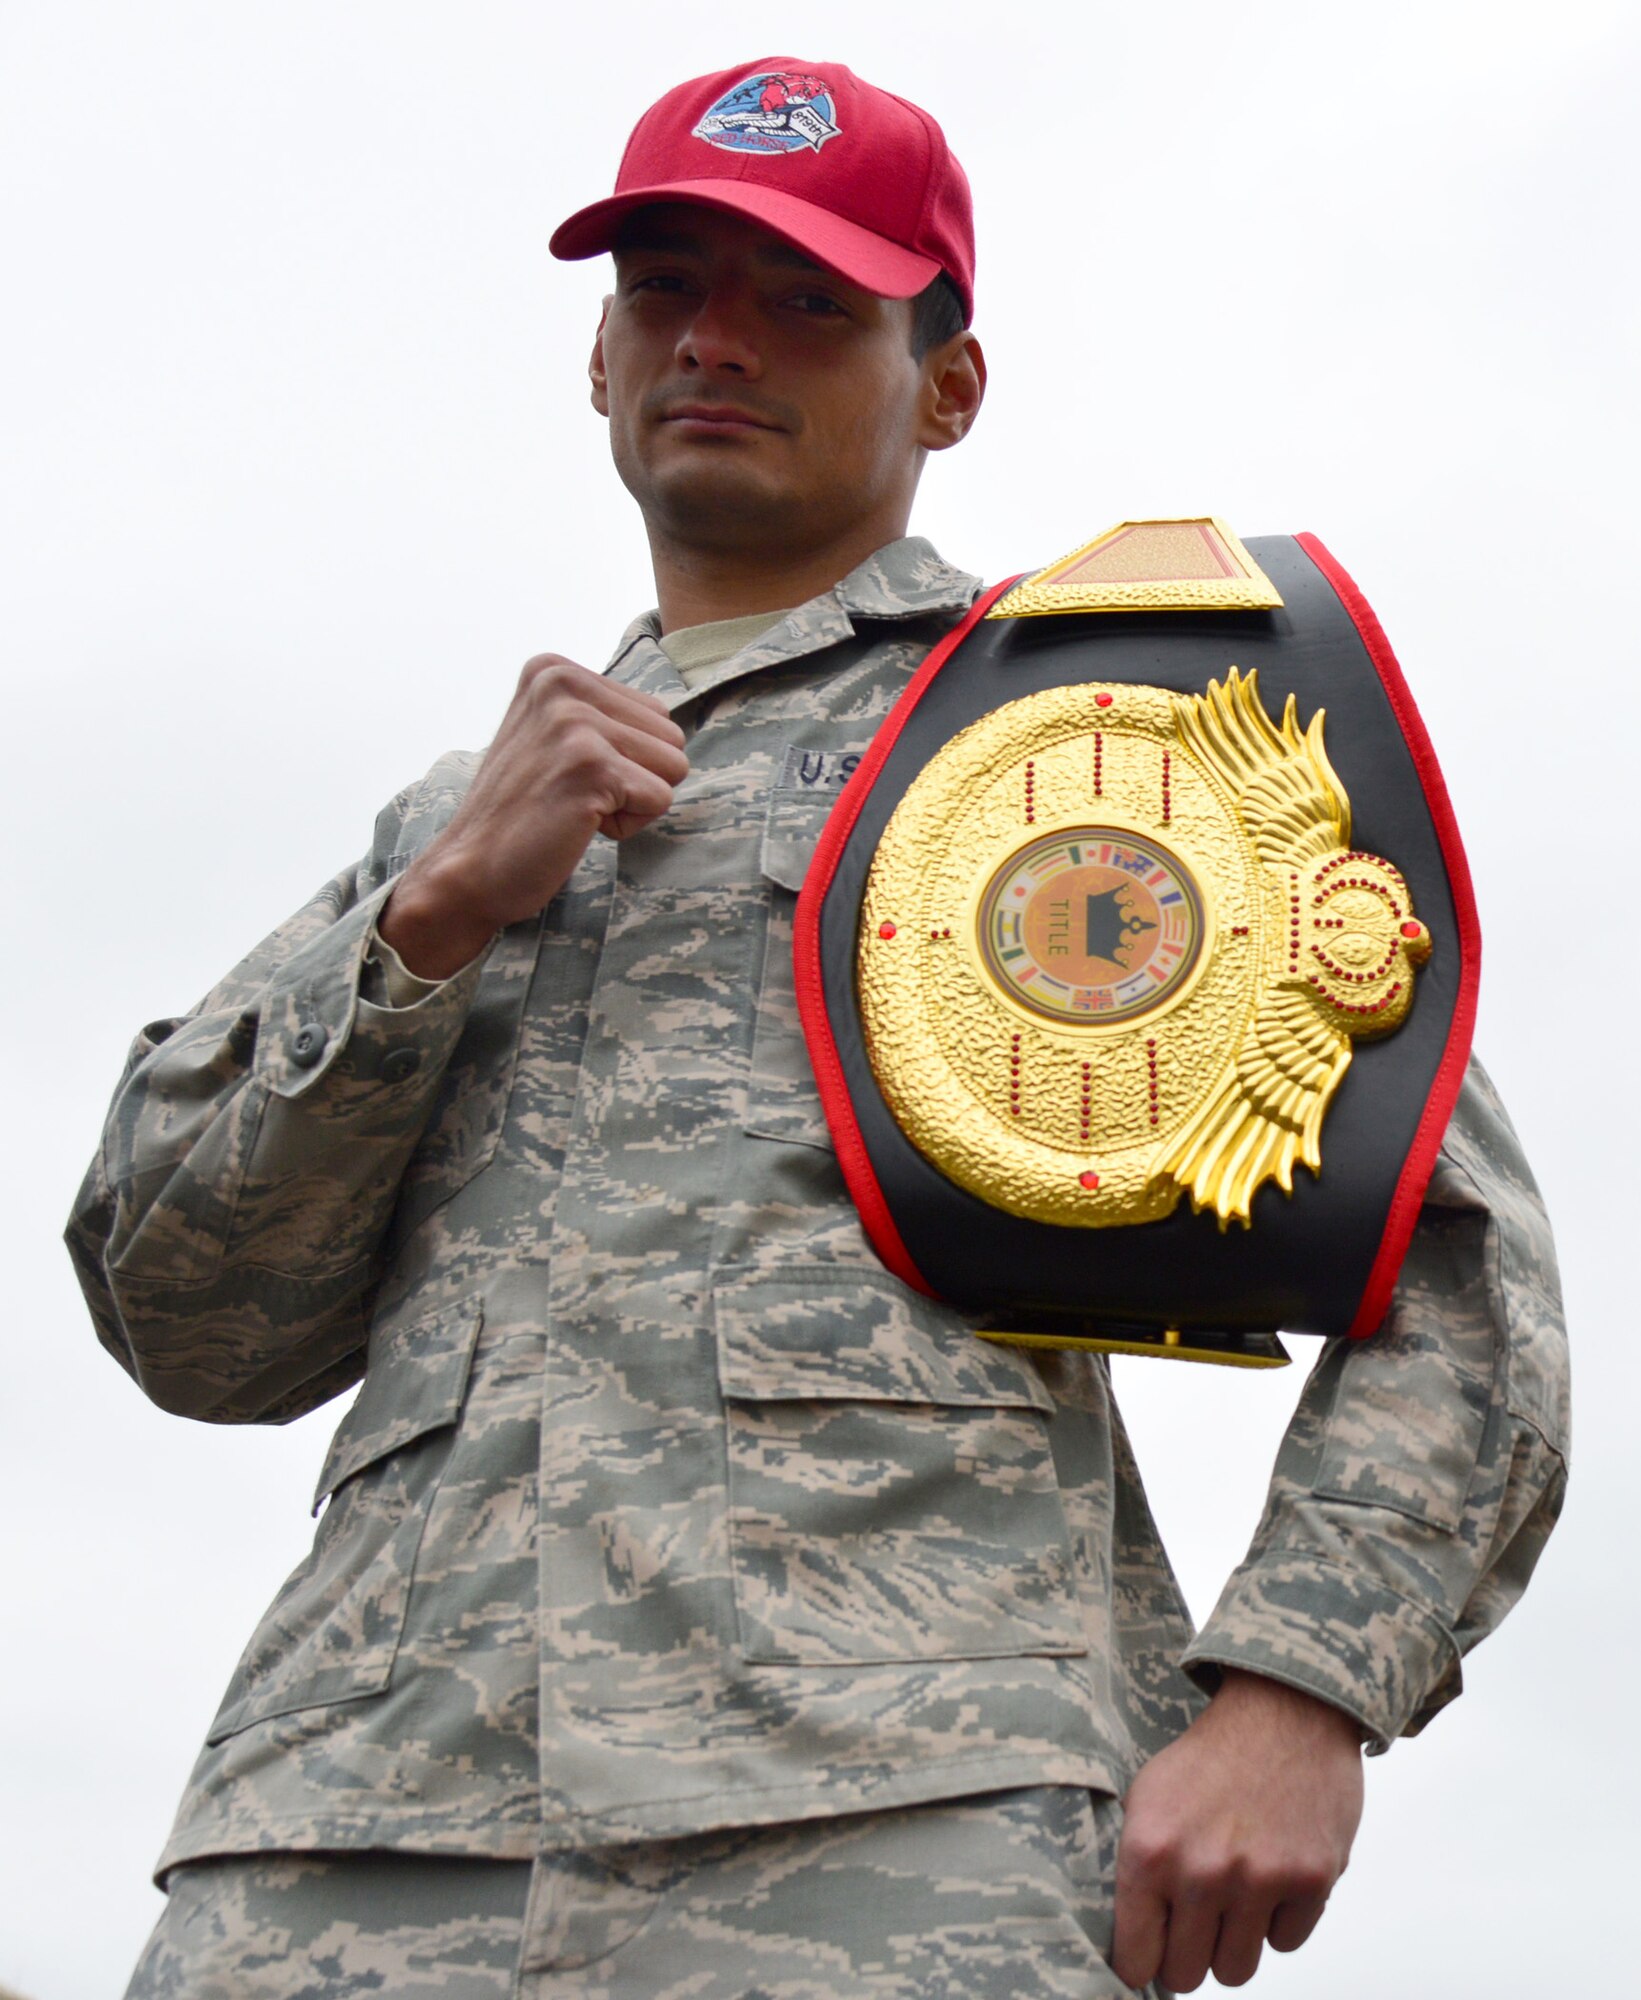 Senior Airman Mark Wirth, a 819th RED HORSE Squadron structural engineer, poses for a photo Oct. 27, 2015, at Malmstrom Air Force Base, Mont. Wirth holds the title for the 125-pound flyweight division for Fight Force, a group he fights for. (U.S. Air Force photo/Airman Daniel Brosam)